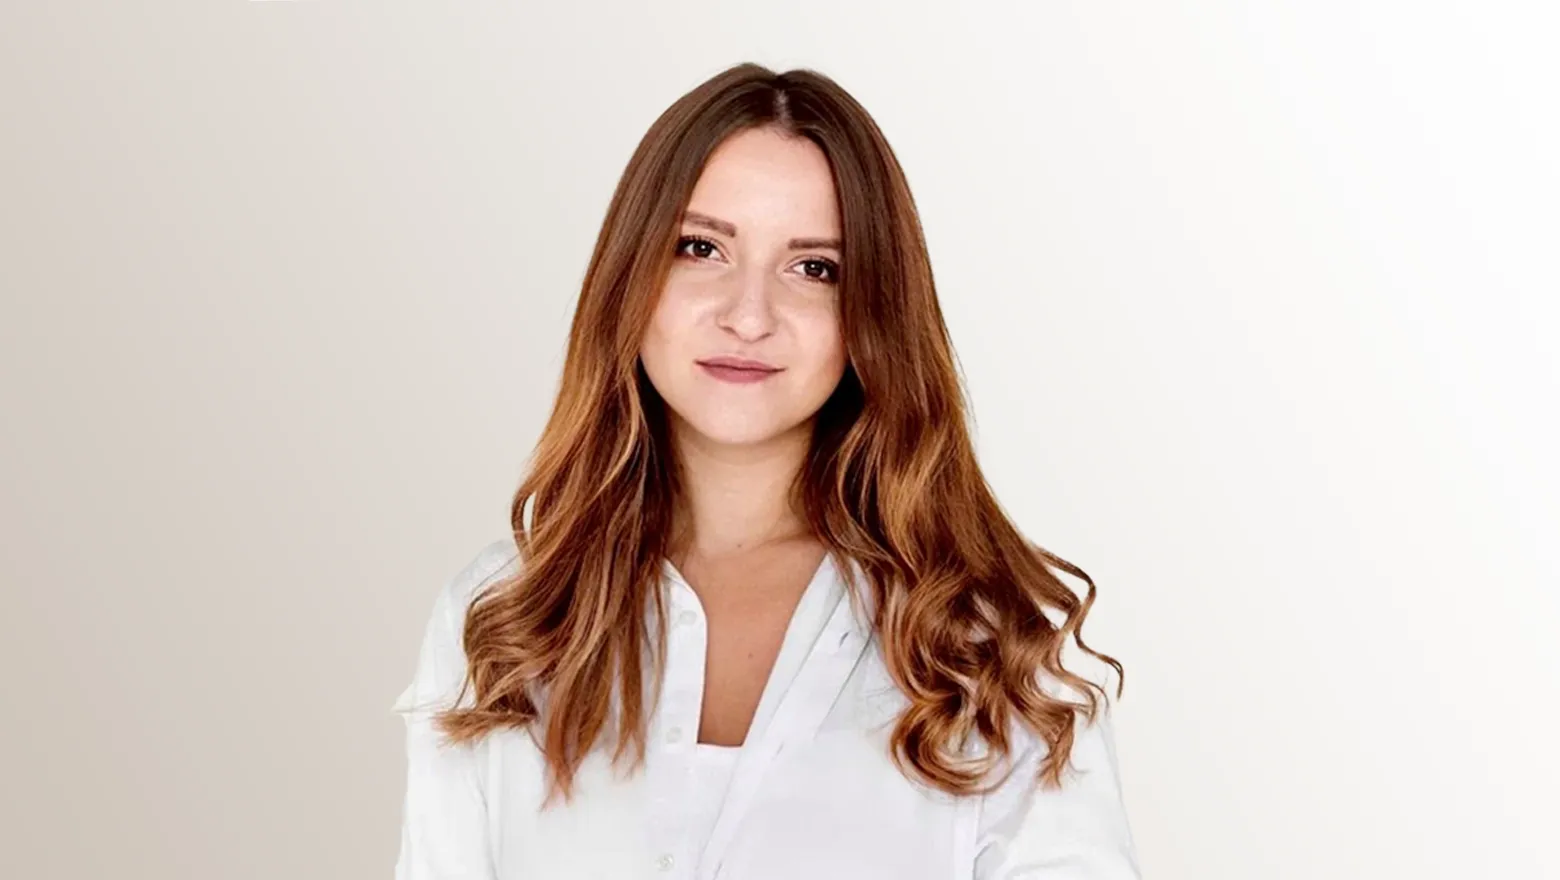 Valeriya Grebenkova is standing in front of a mushroom grey background, and is wearing a white shirt